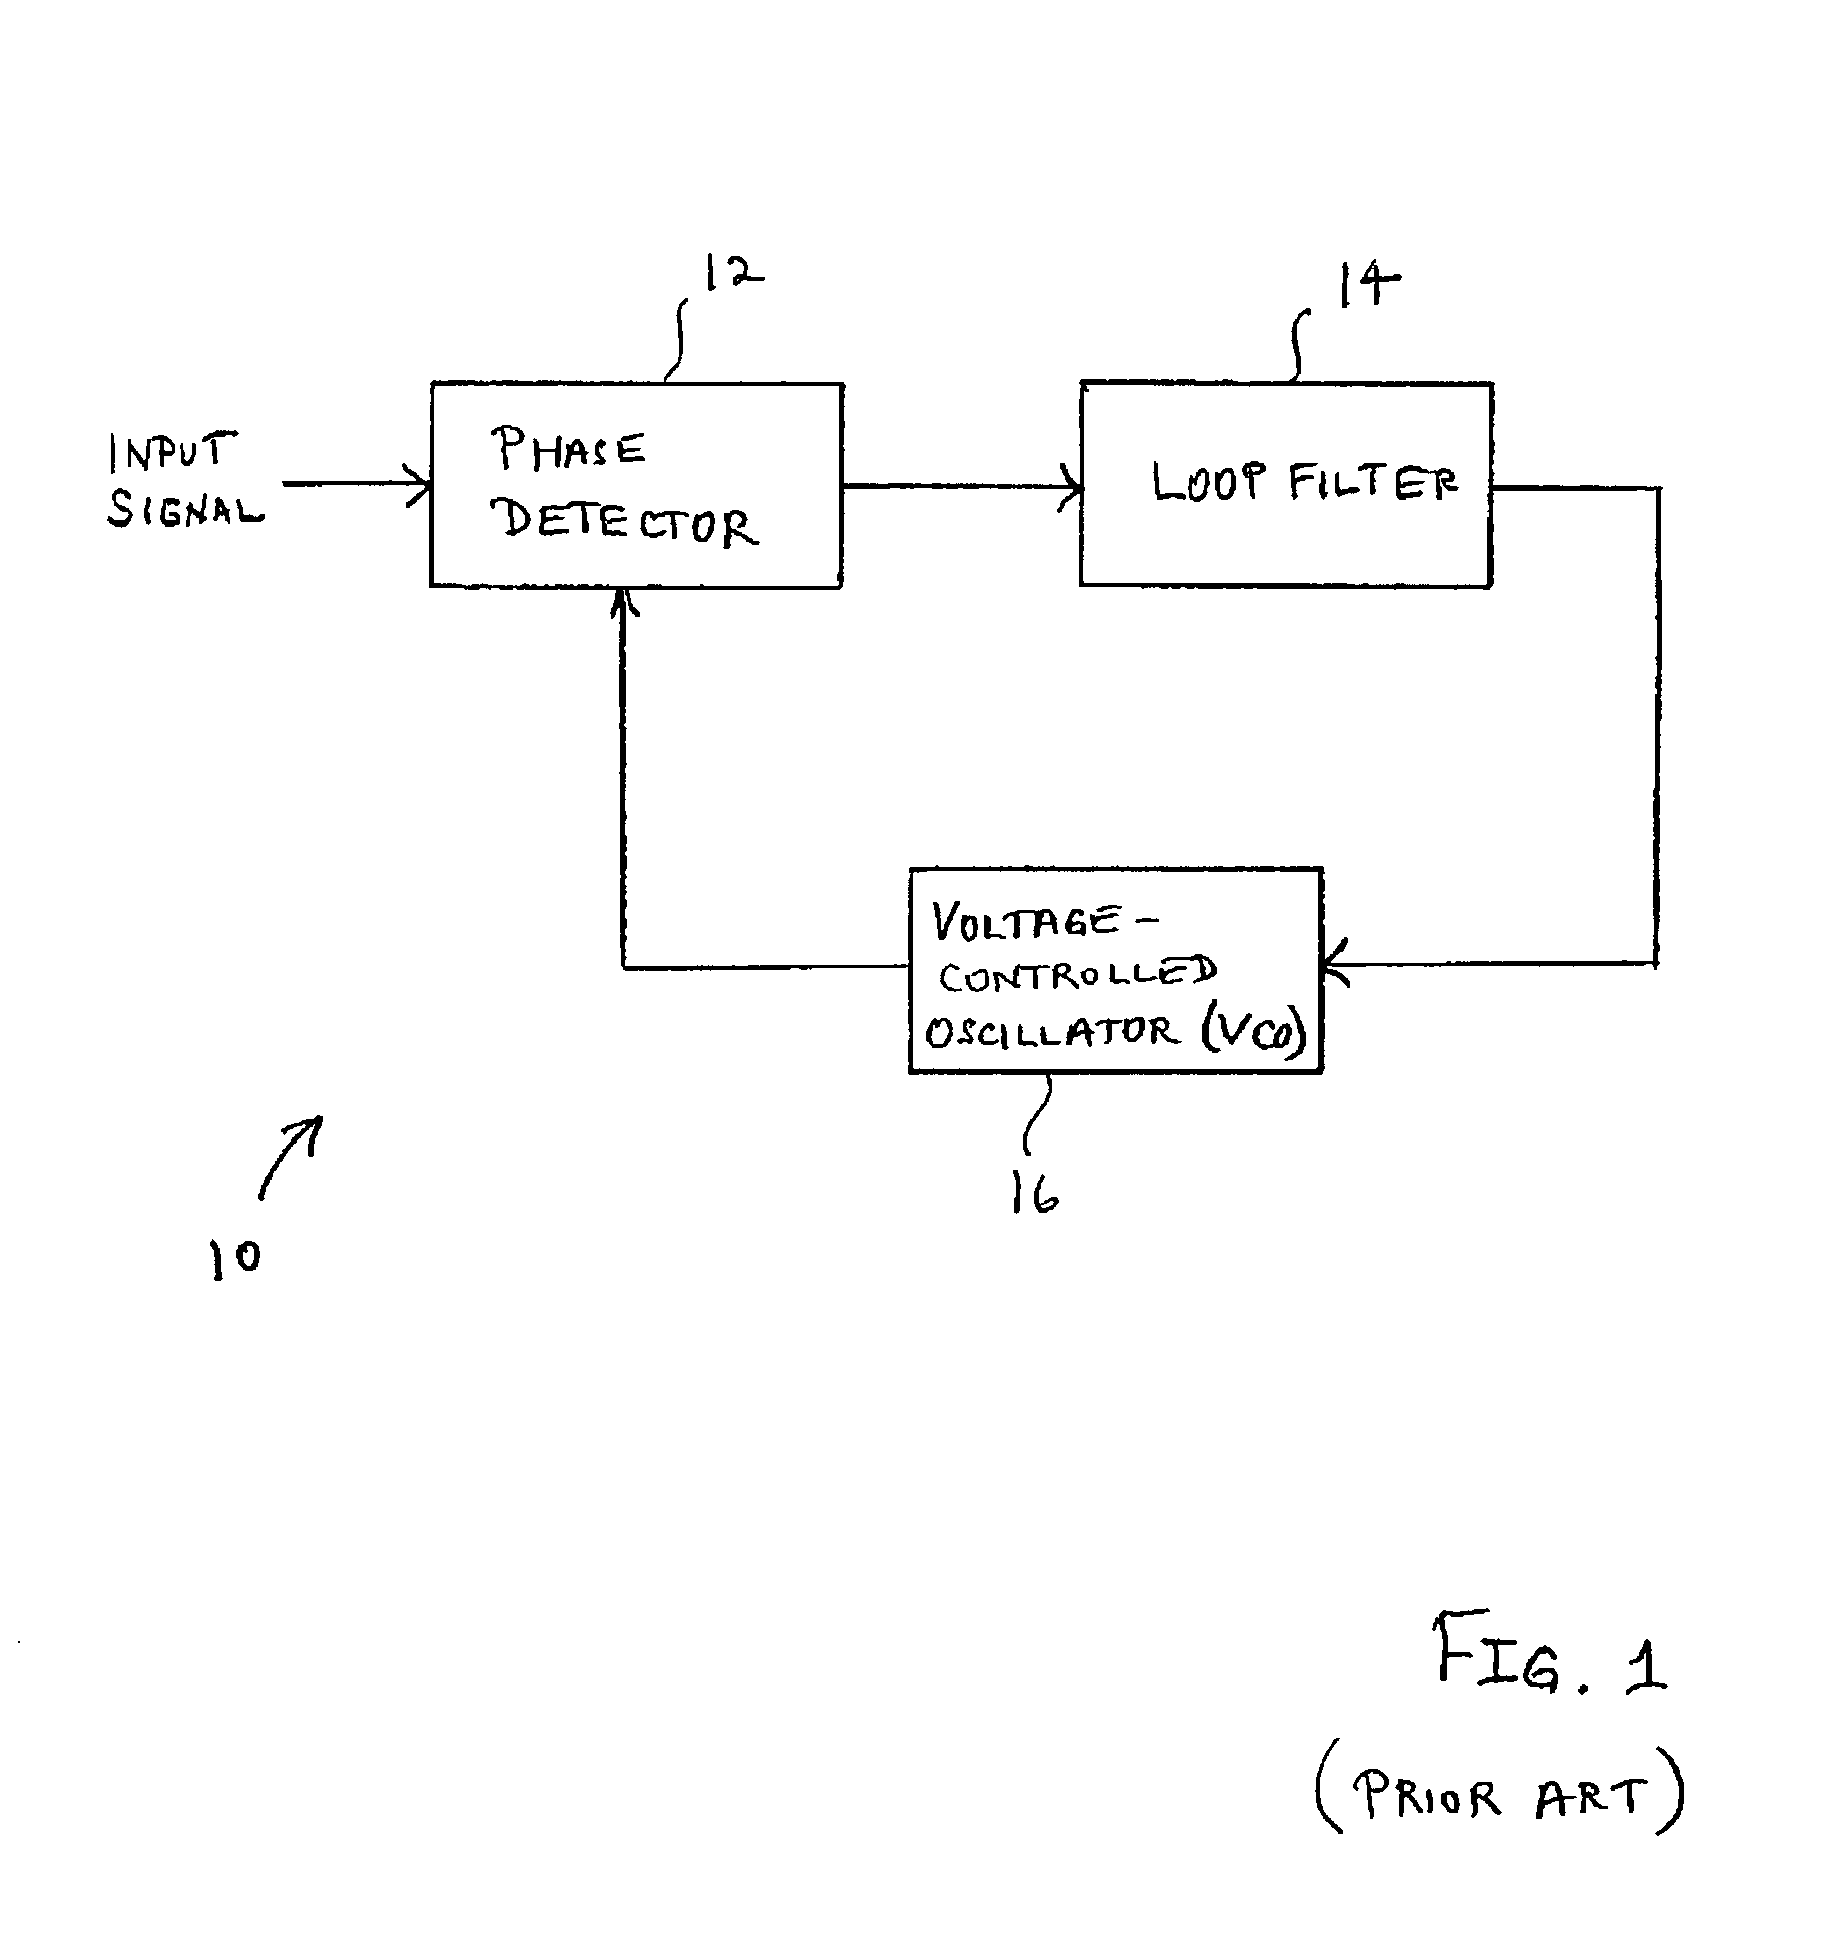 Apparatus and method for radio frequency tracking and acquisition